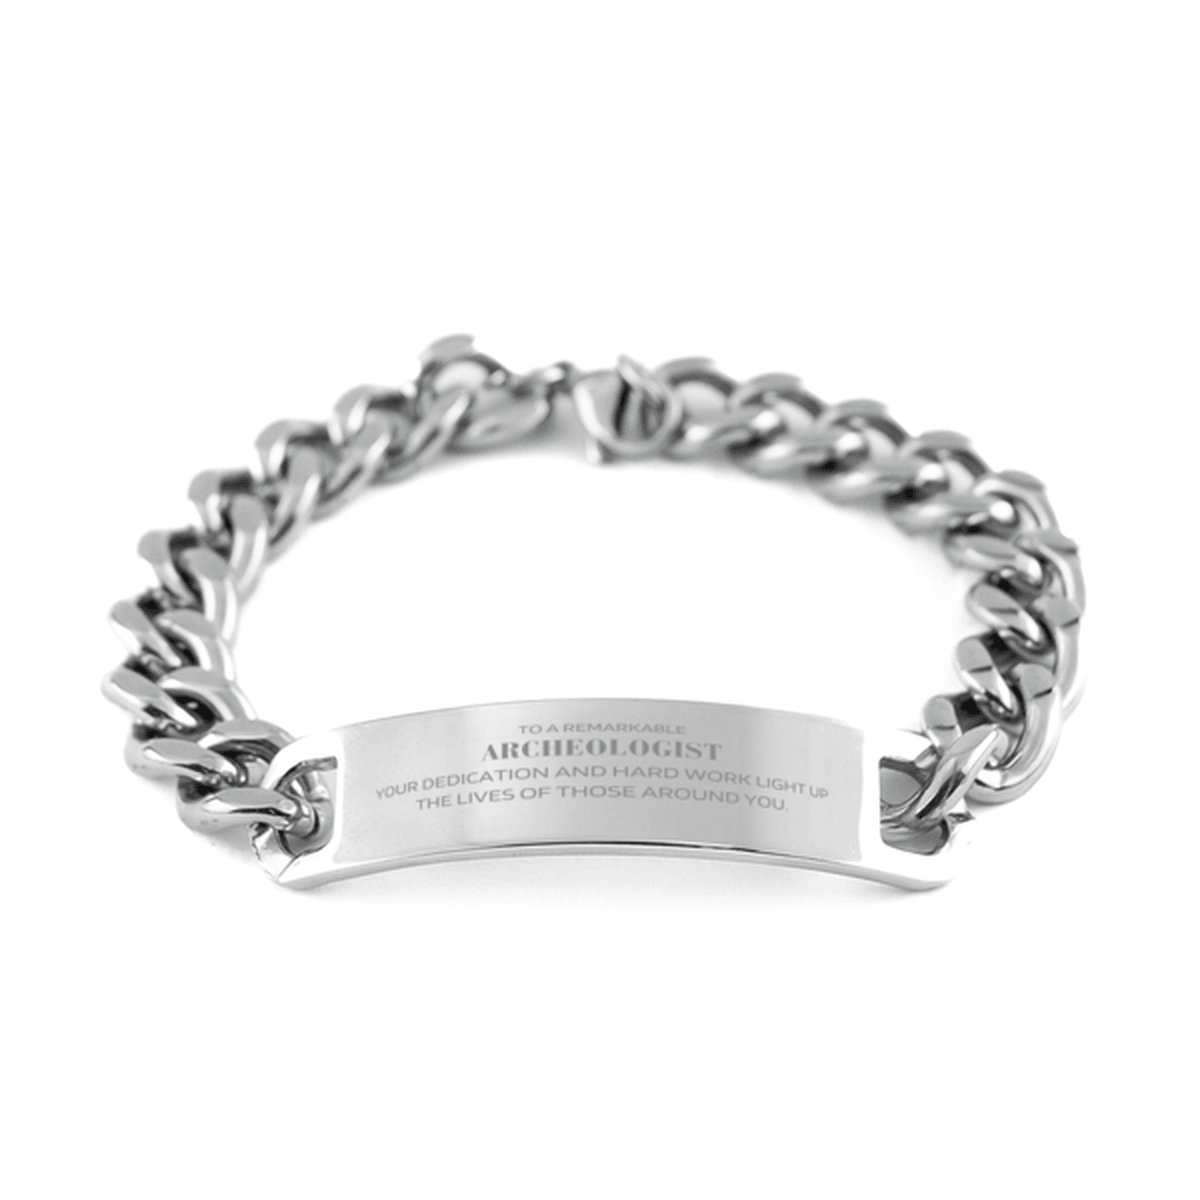 Remarkable Archeologist Gifts, Your dedication and hard work, Inspirational Birthday Christmas Unique Cuban Chain Stainless Steel Bracelet For Archeologist, Coworkers, Men, Women, Friends - Mallard Moon Gift Shop